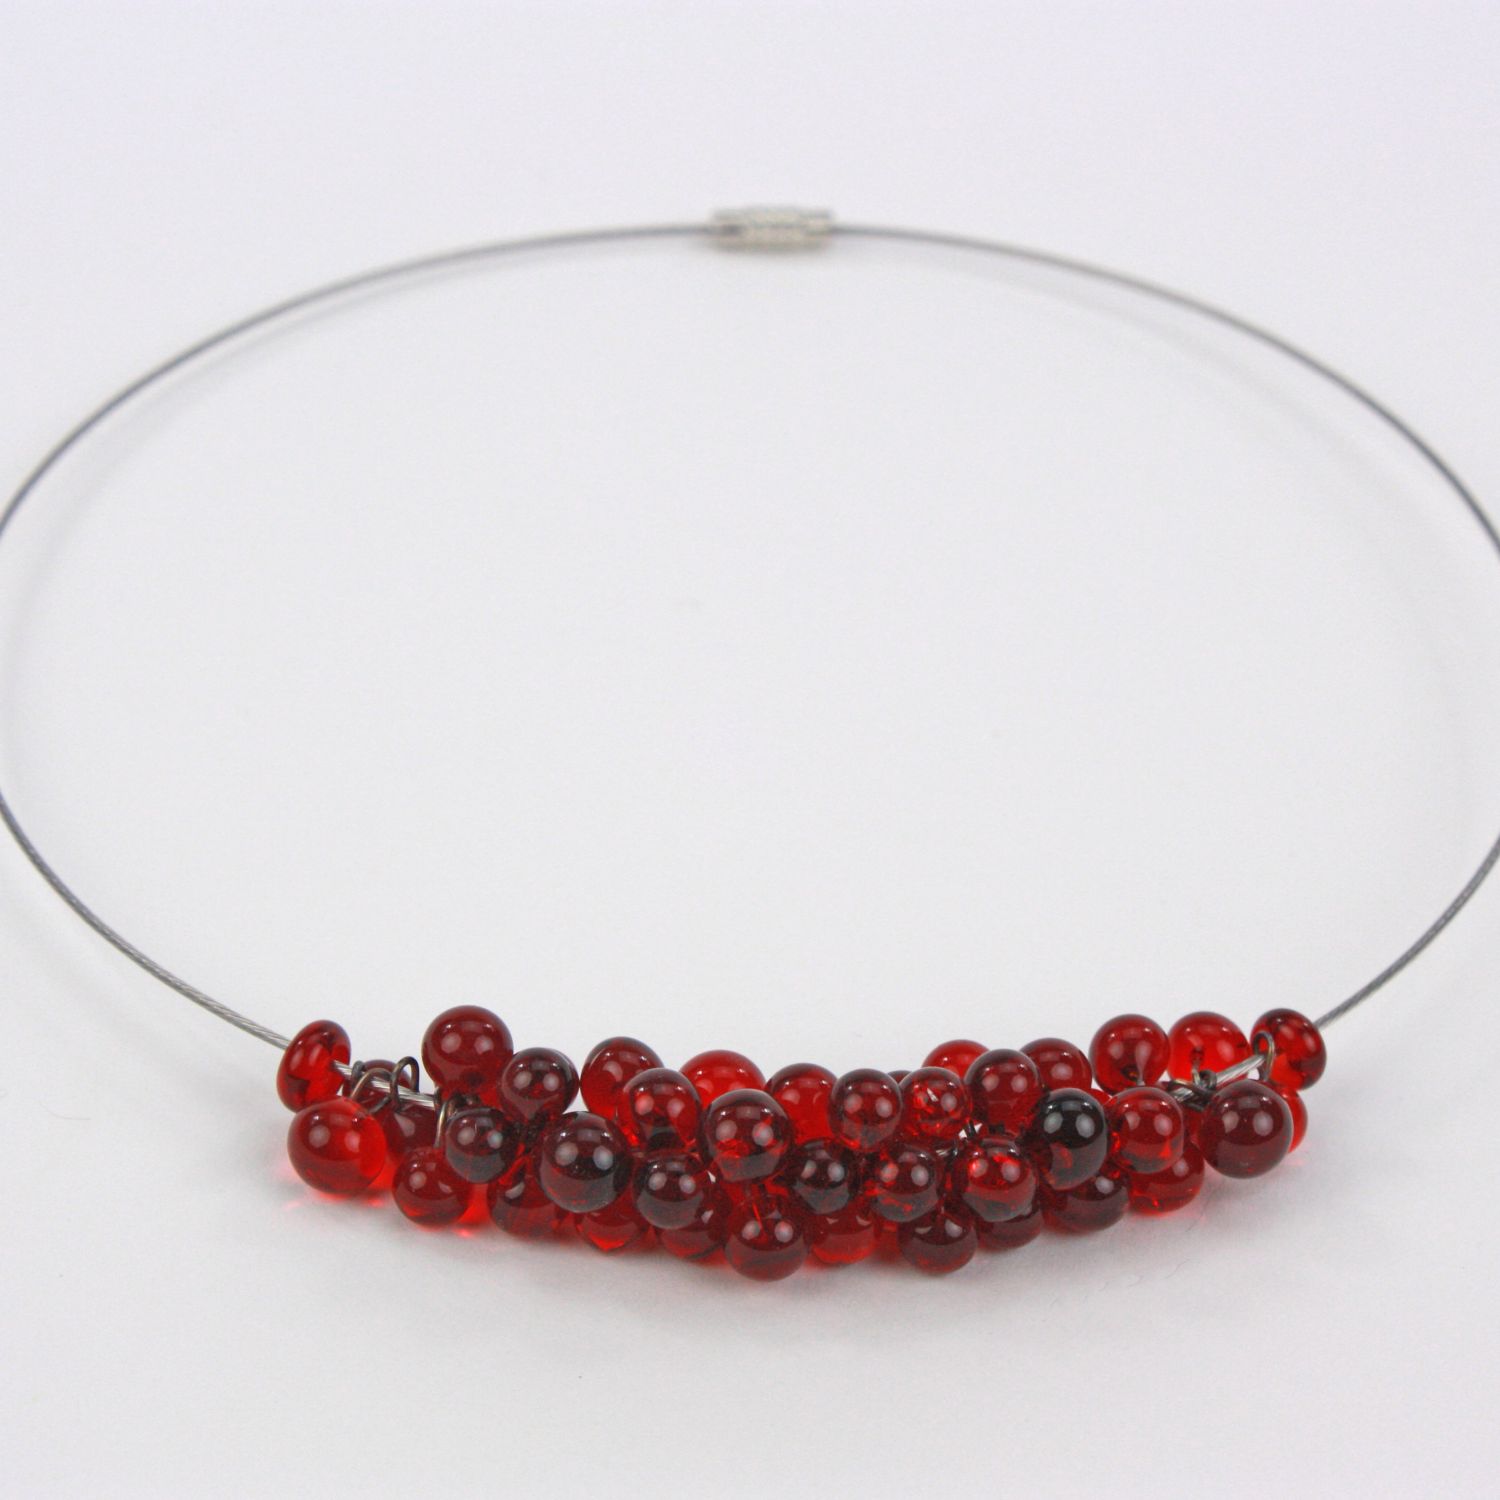 Alicia Niles: Petite Chroma Necklace – Red Product Image 2 of 3